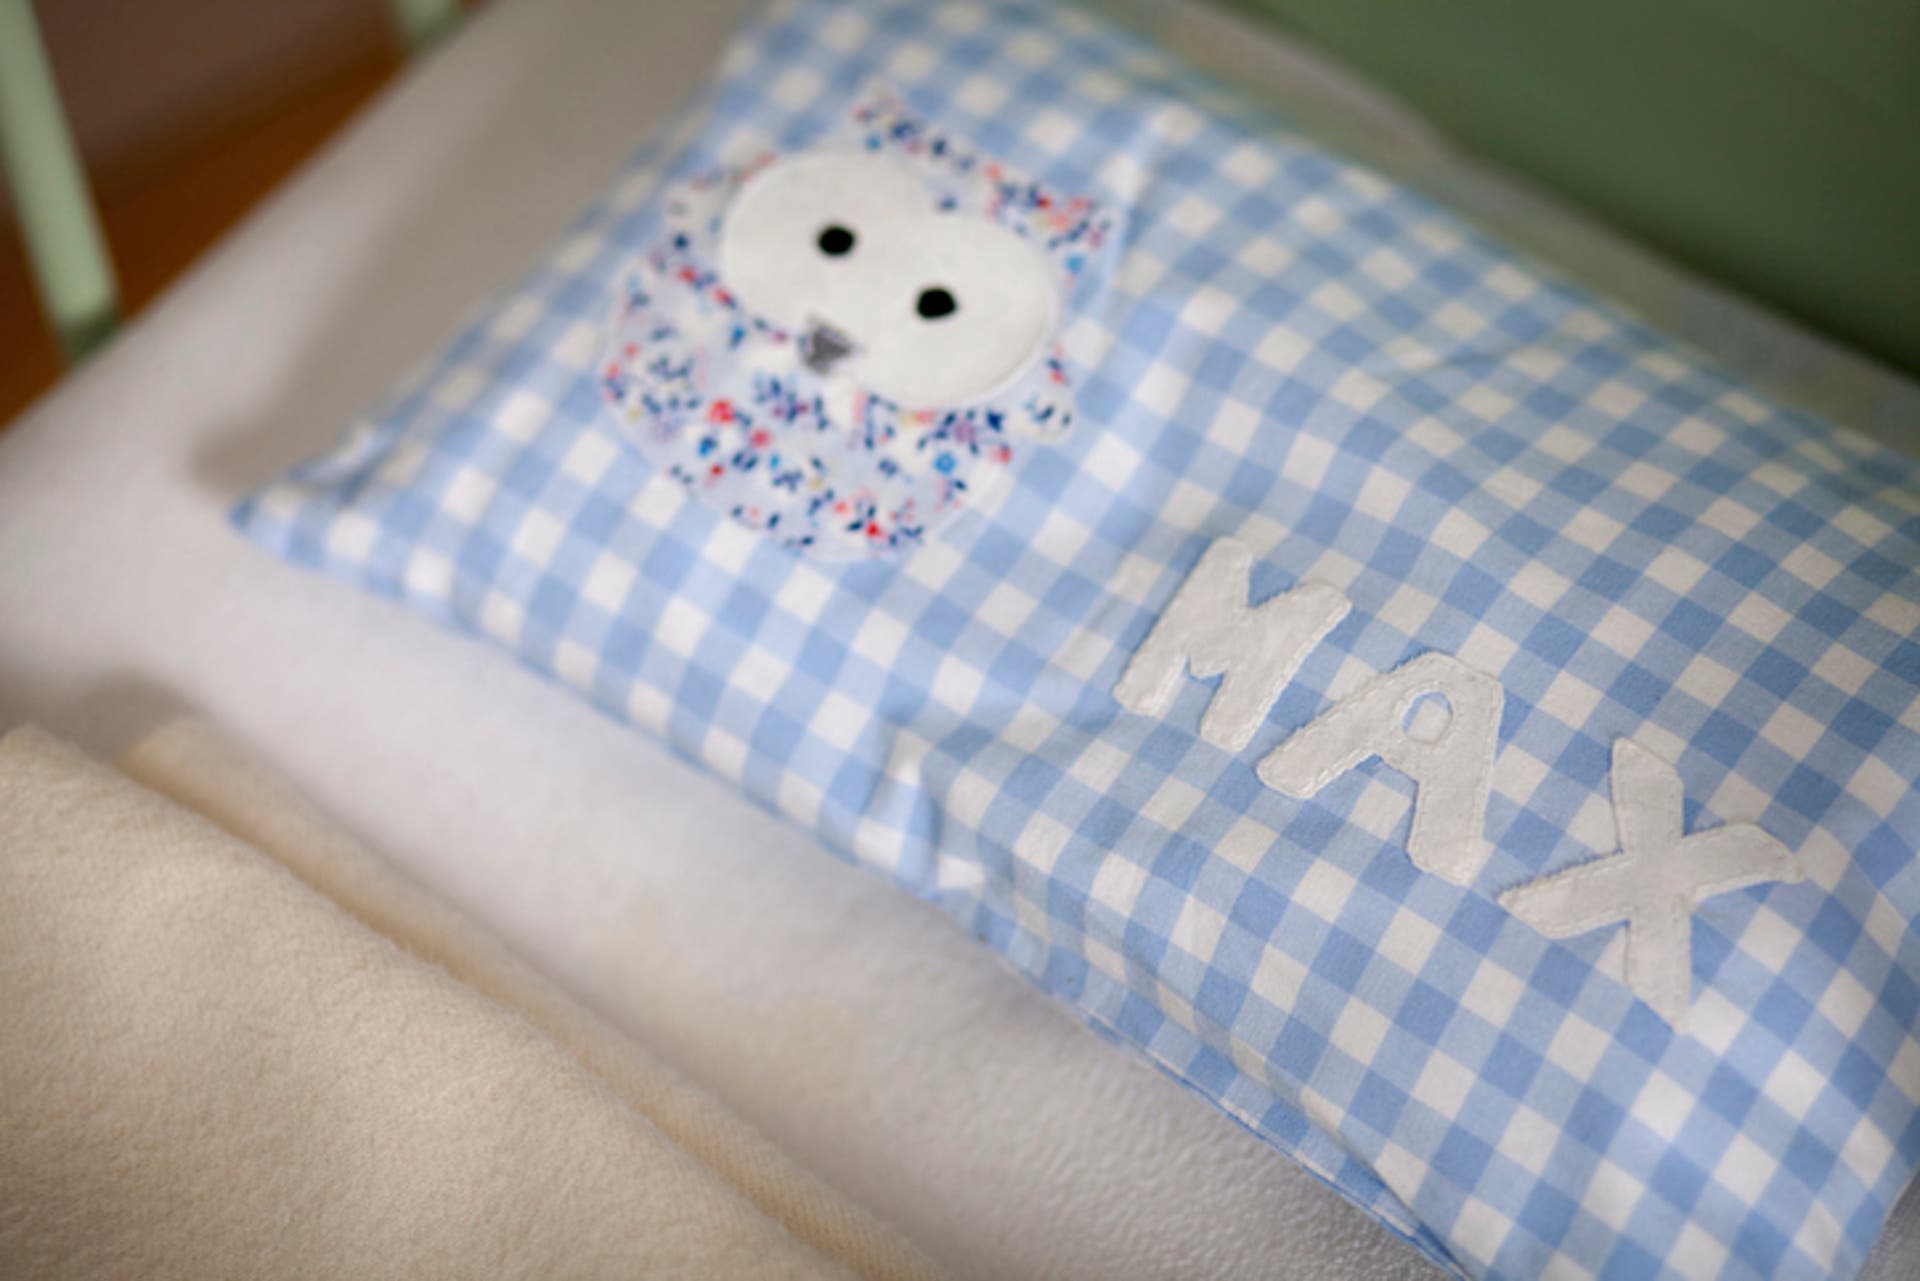  a personalised pillow In a baby crib 